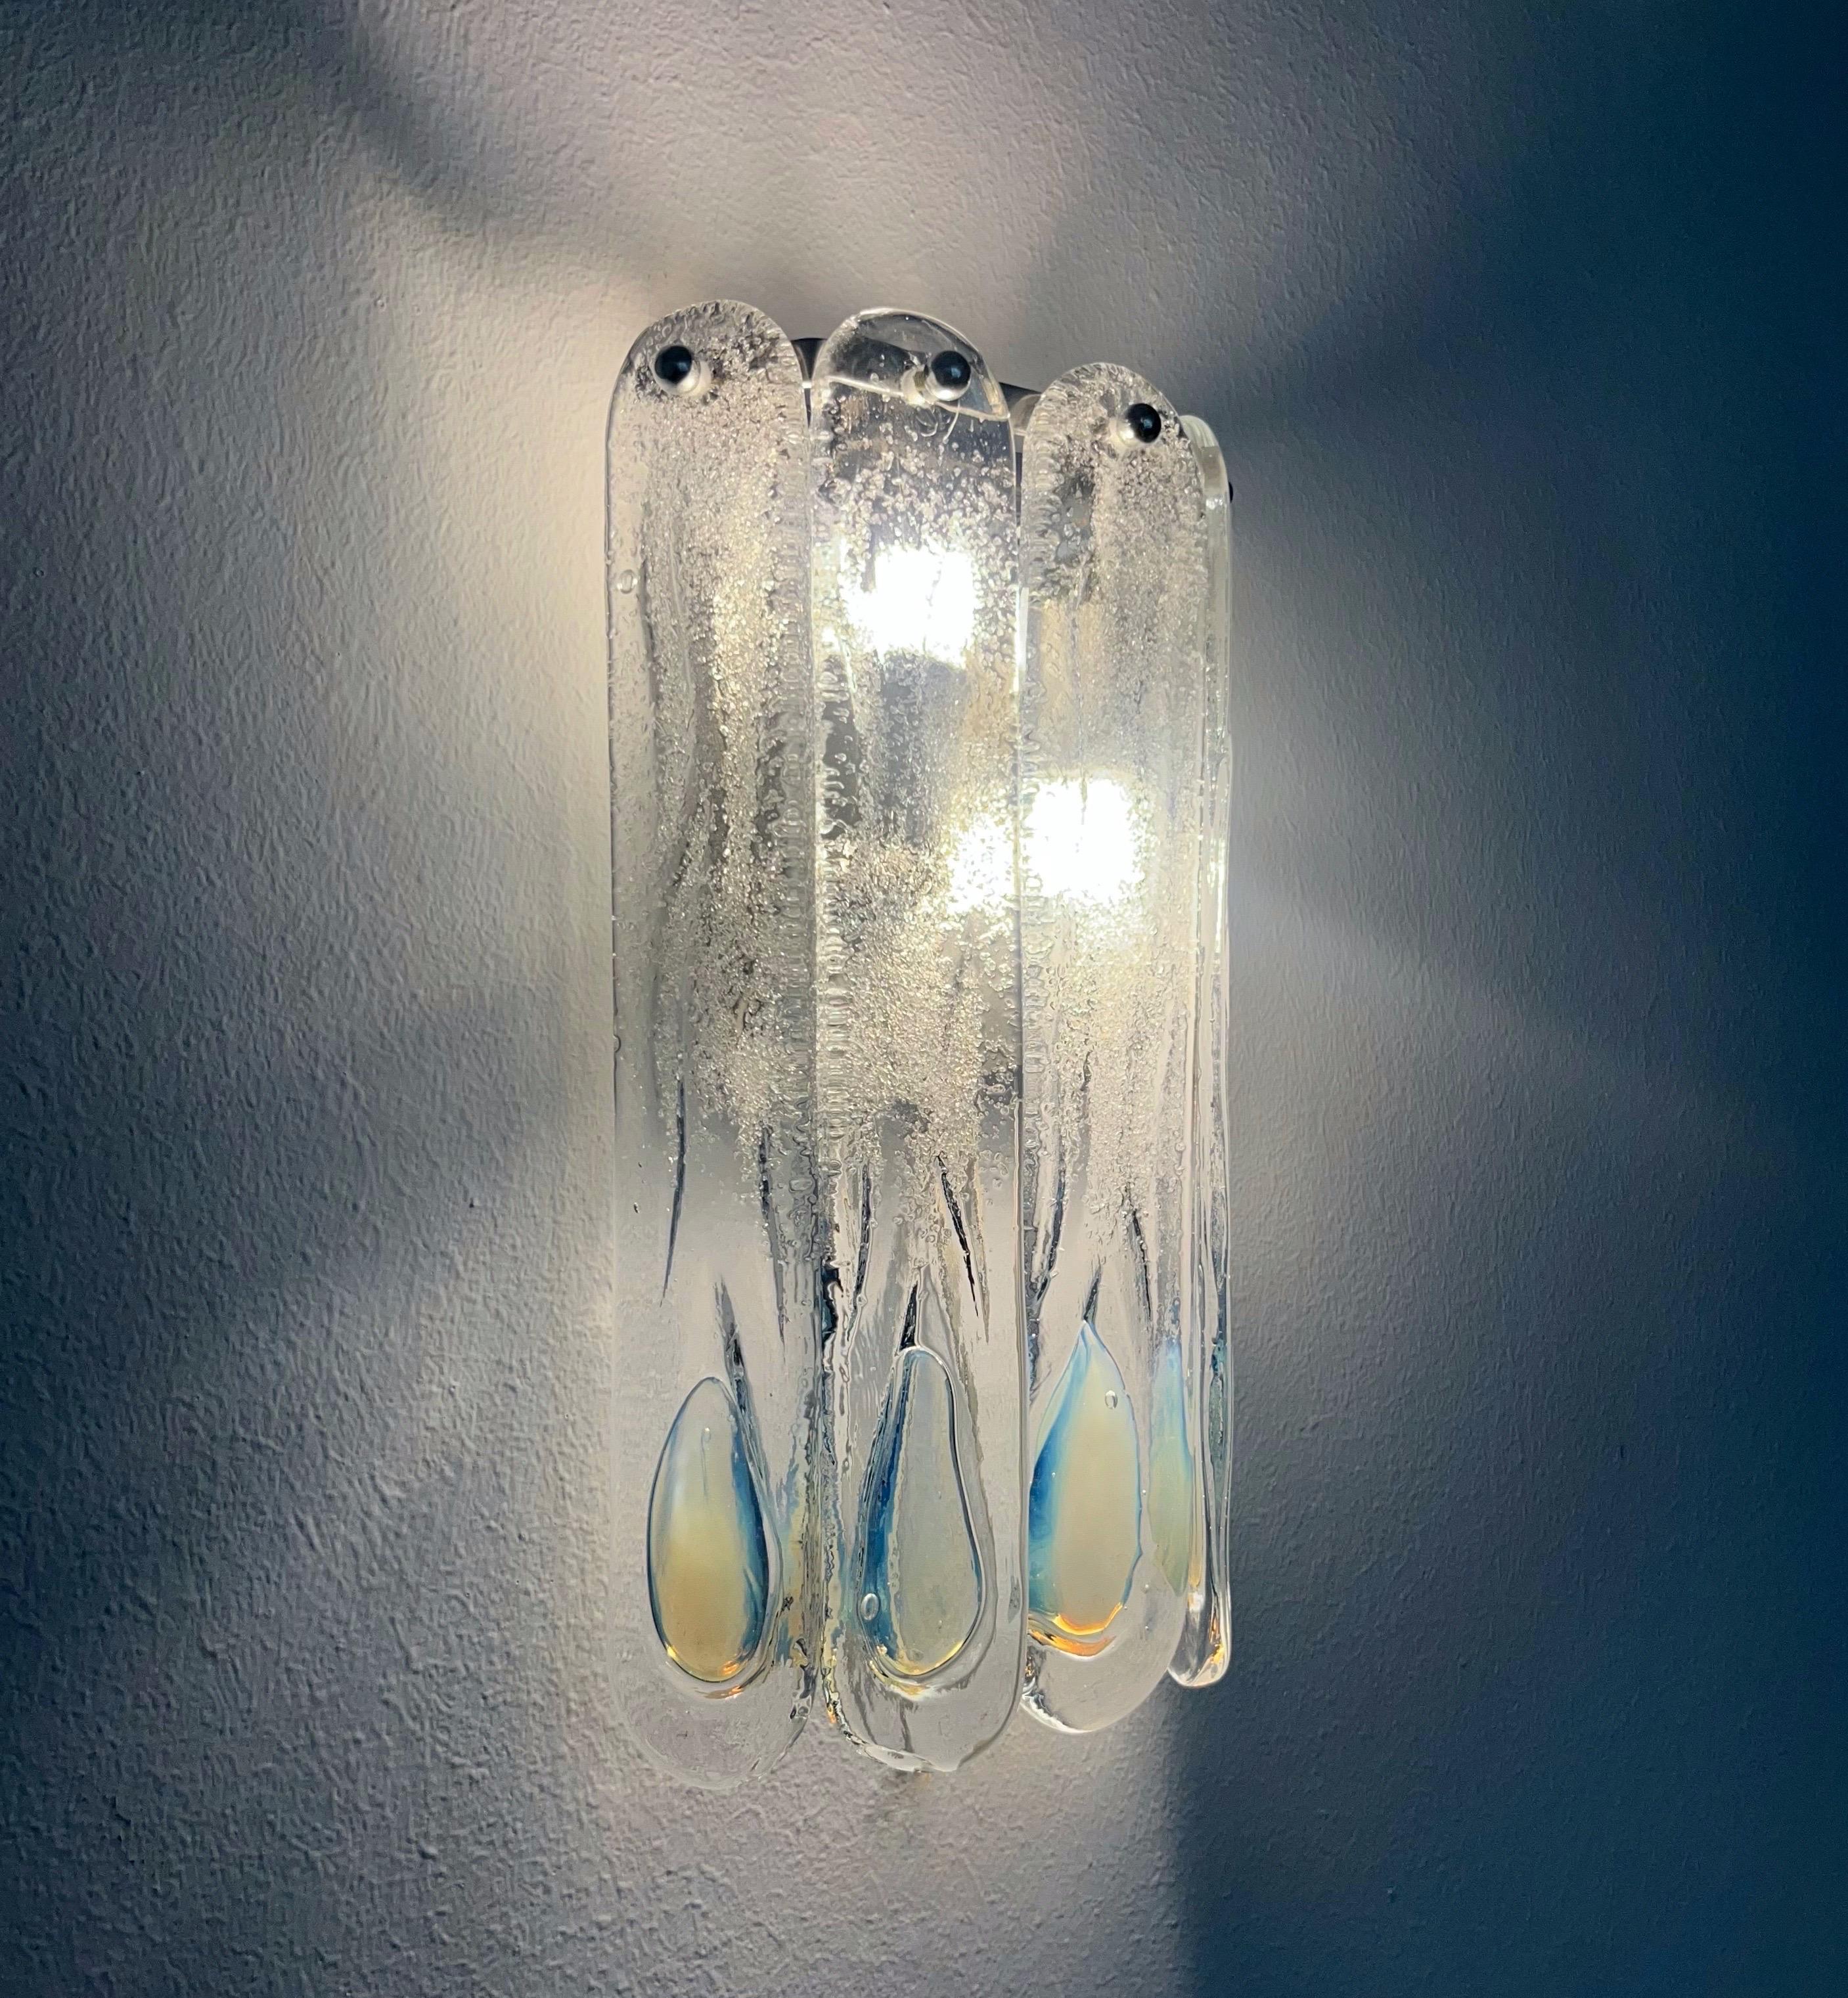 Italian Midcentury Set of Three Iridescent White Wall Sconces by Mazzega, 1970s For Sale 5